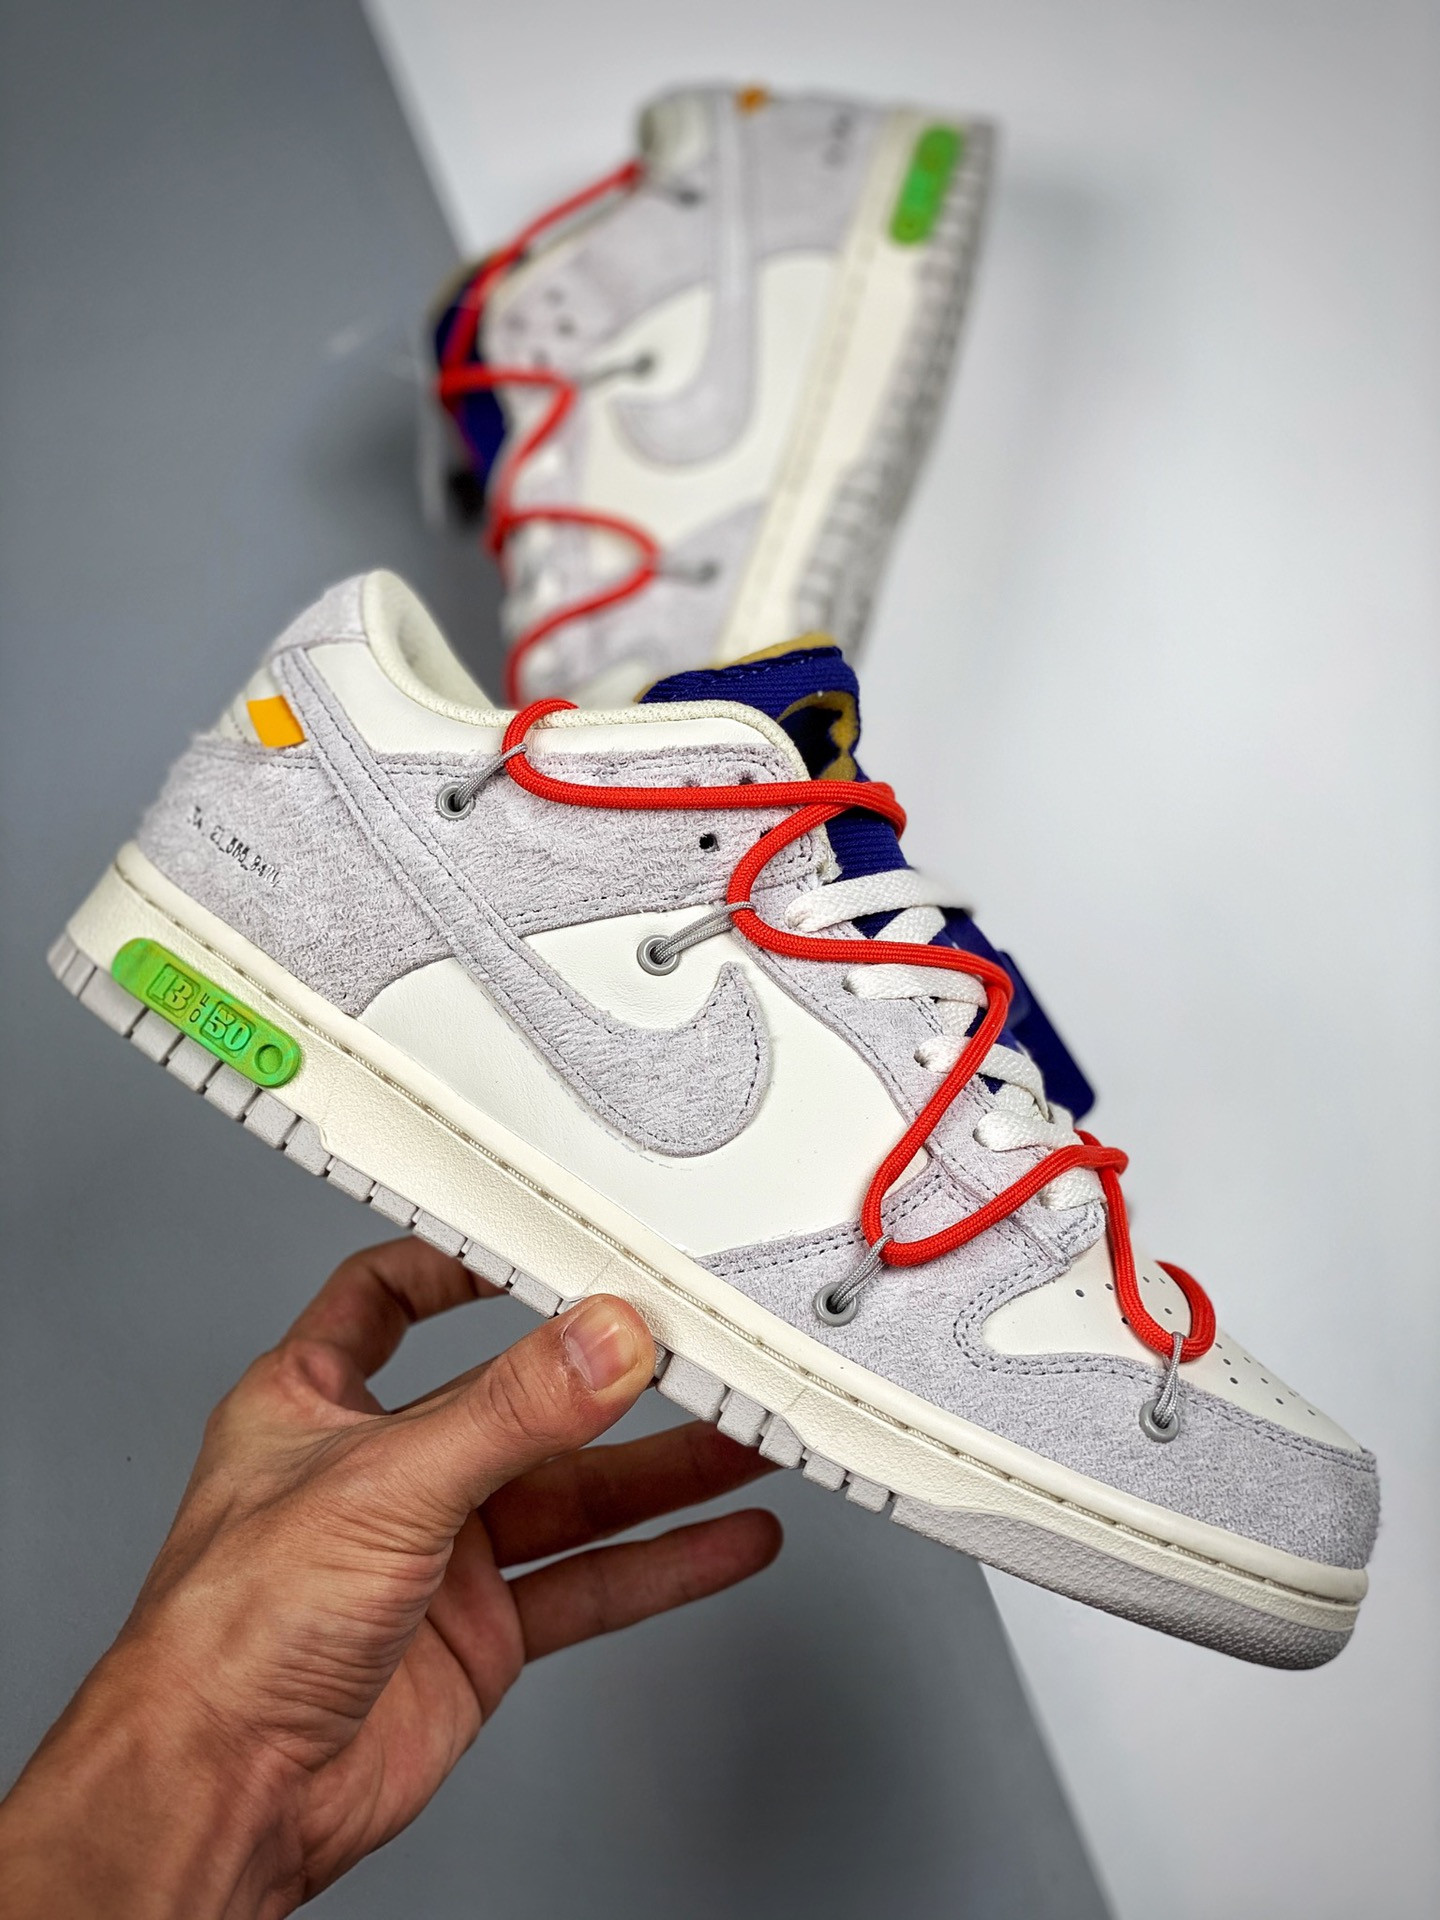 Off-White x Nike Dunk Low 13 of 50 Sail Grey Habanero Red For Sale